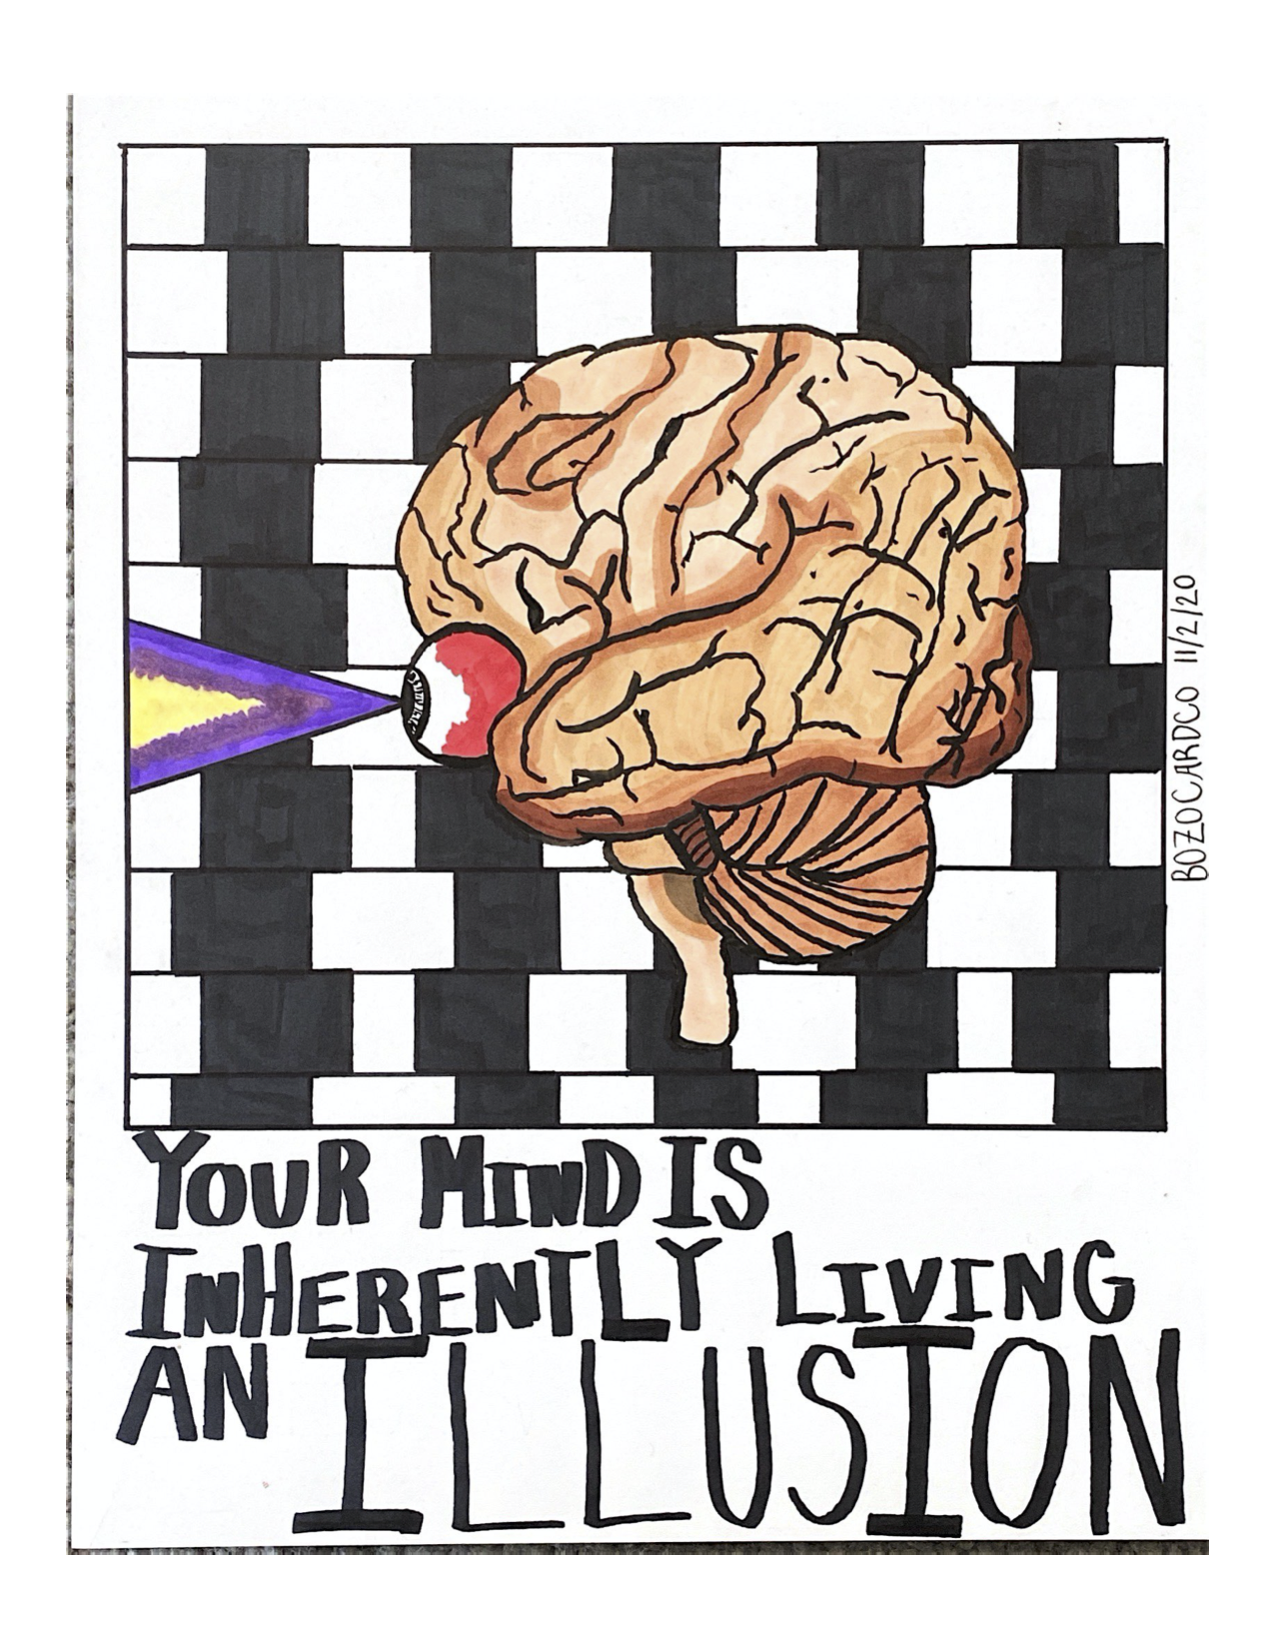 Your mind is inherently living an illusion.